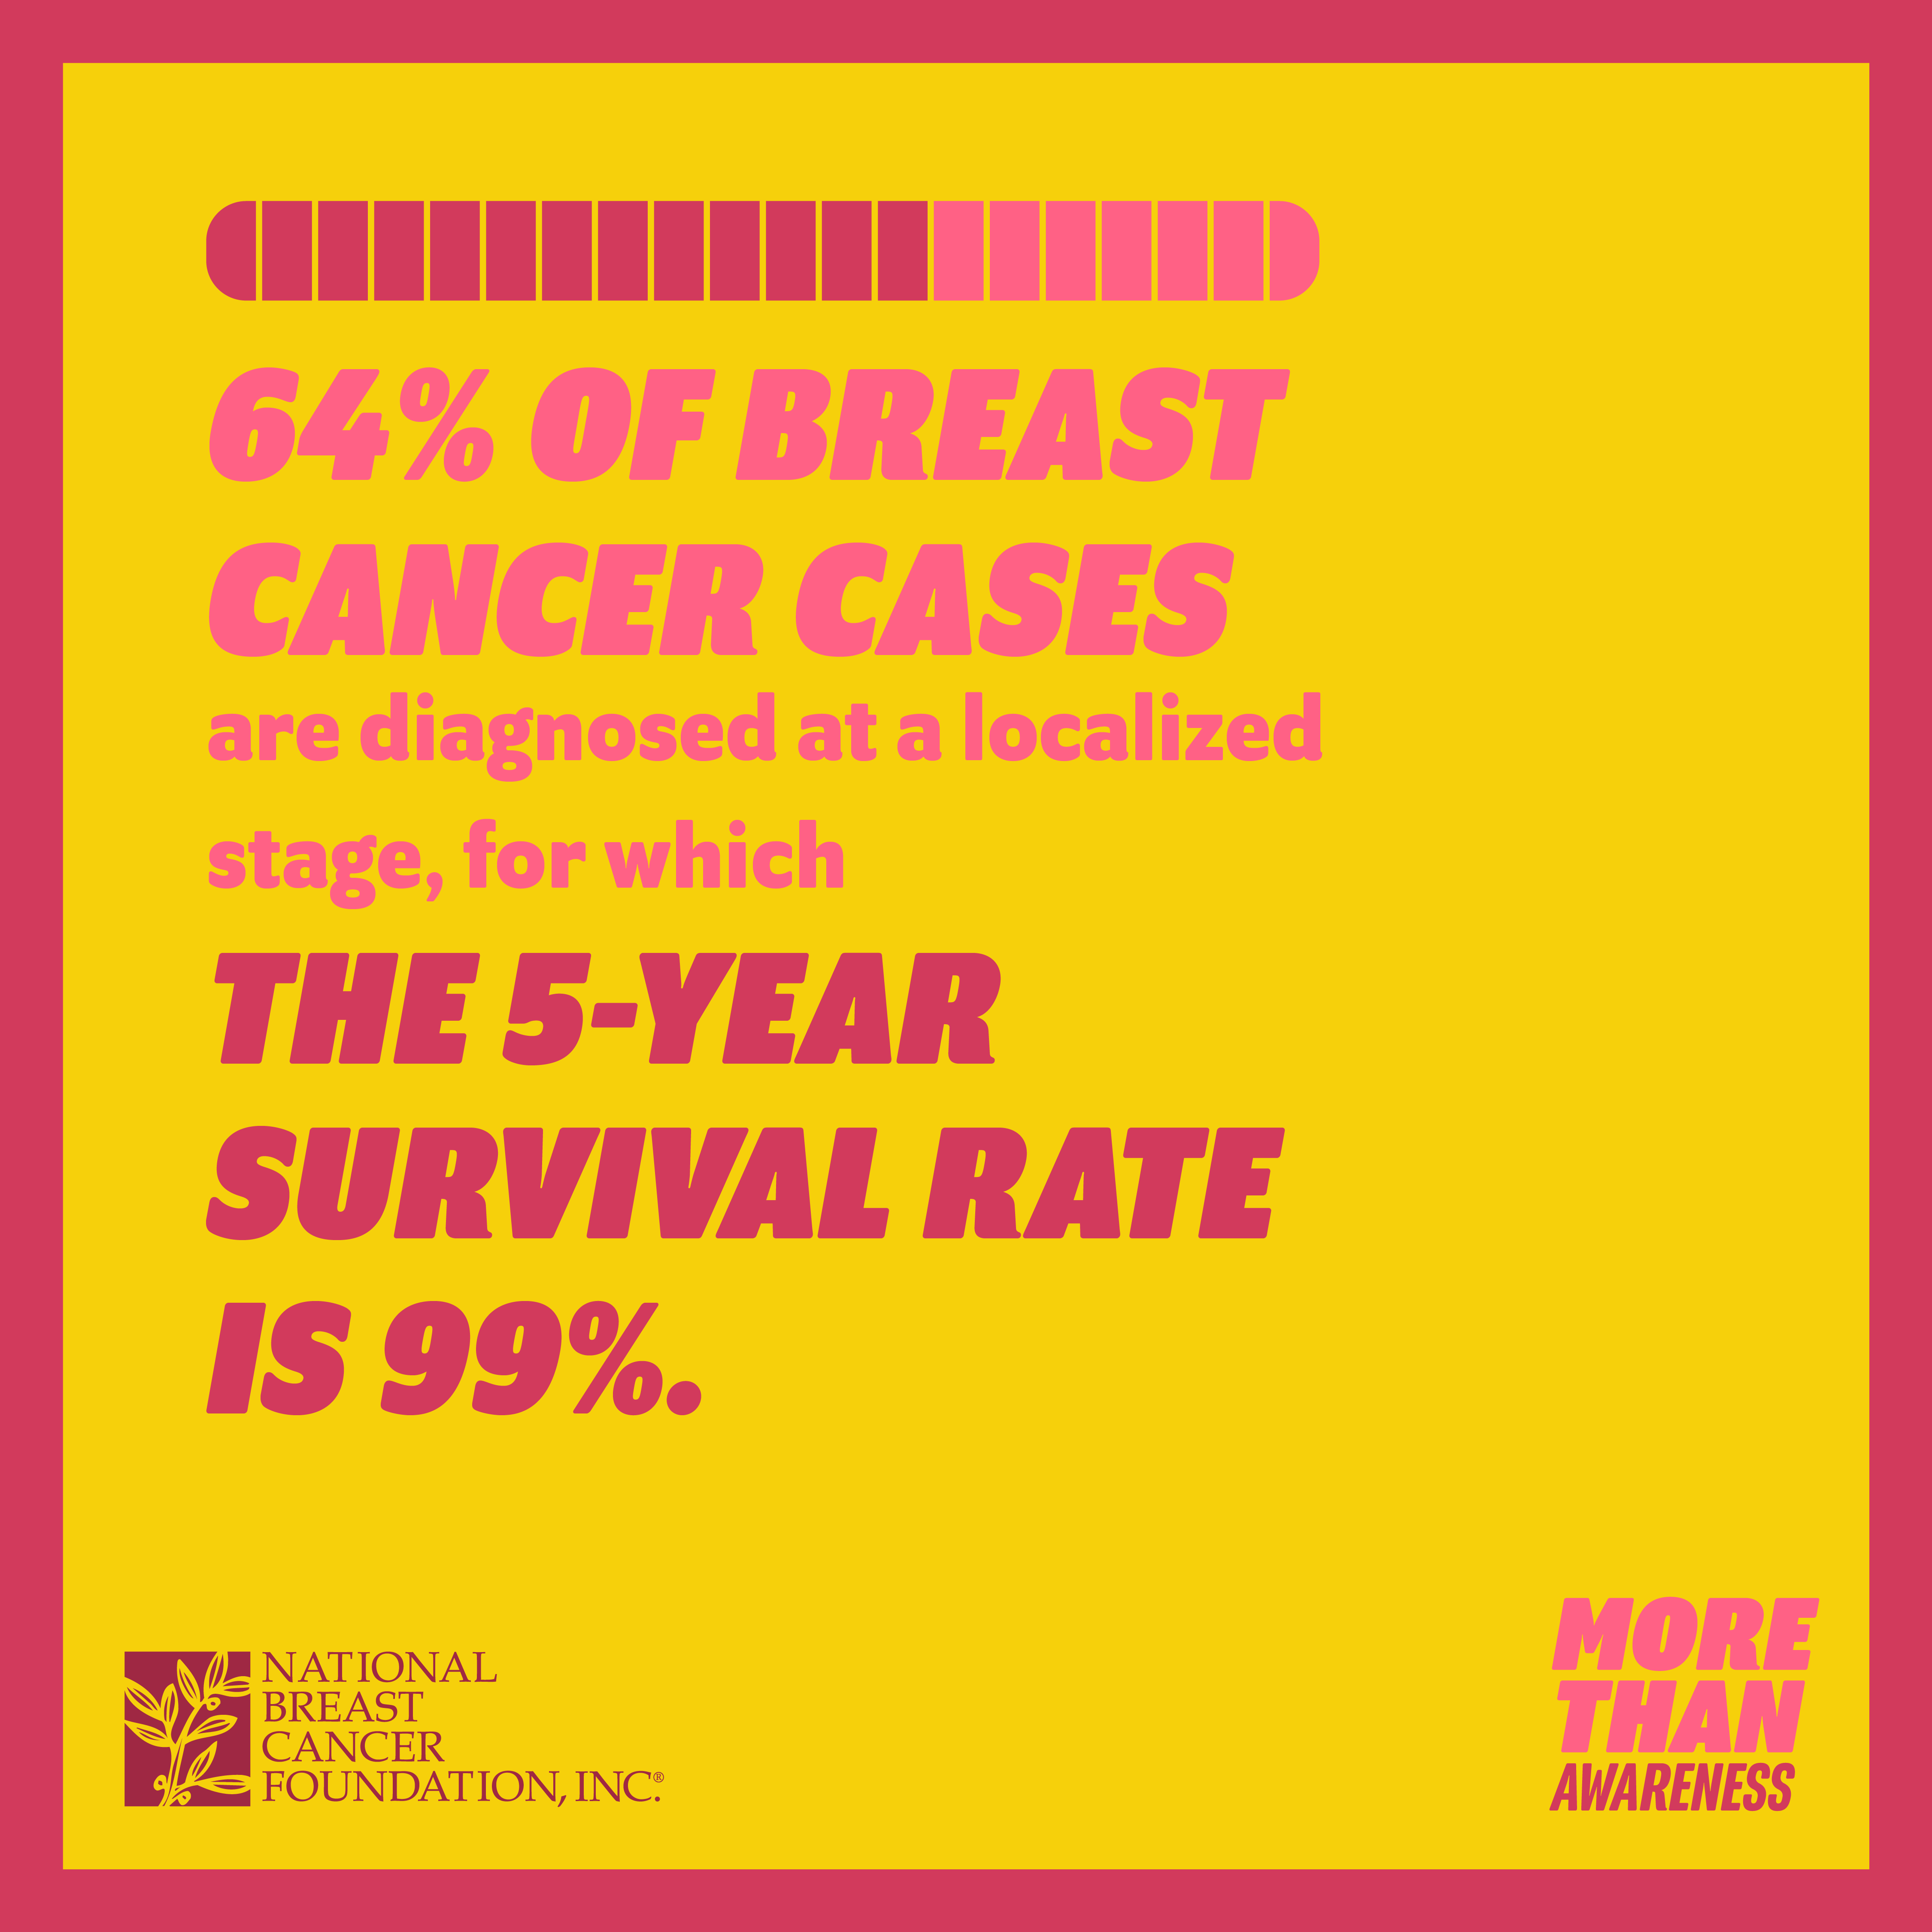 The 5 year survival rate of breast cancer of a diagnosis on a localized stage is 99 percent